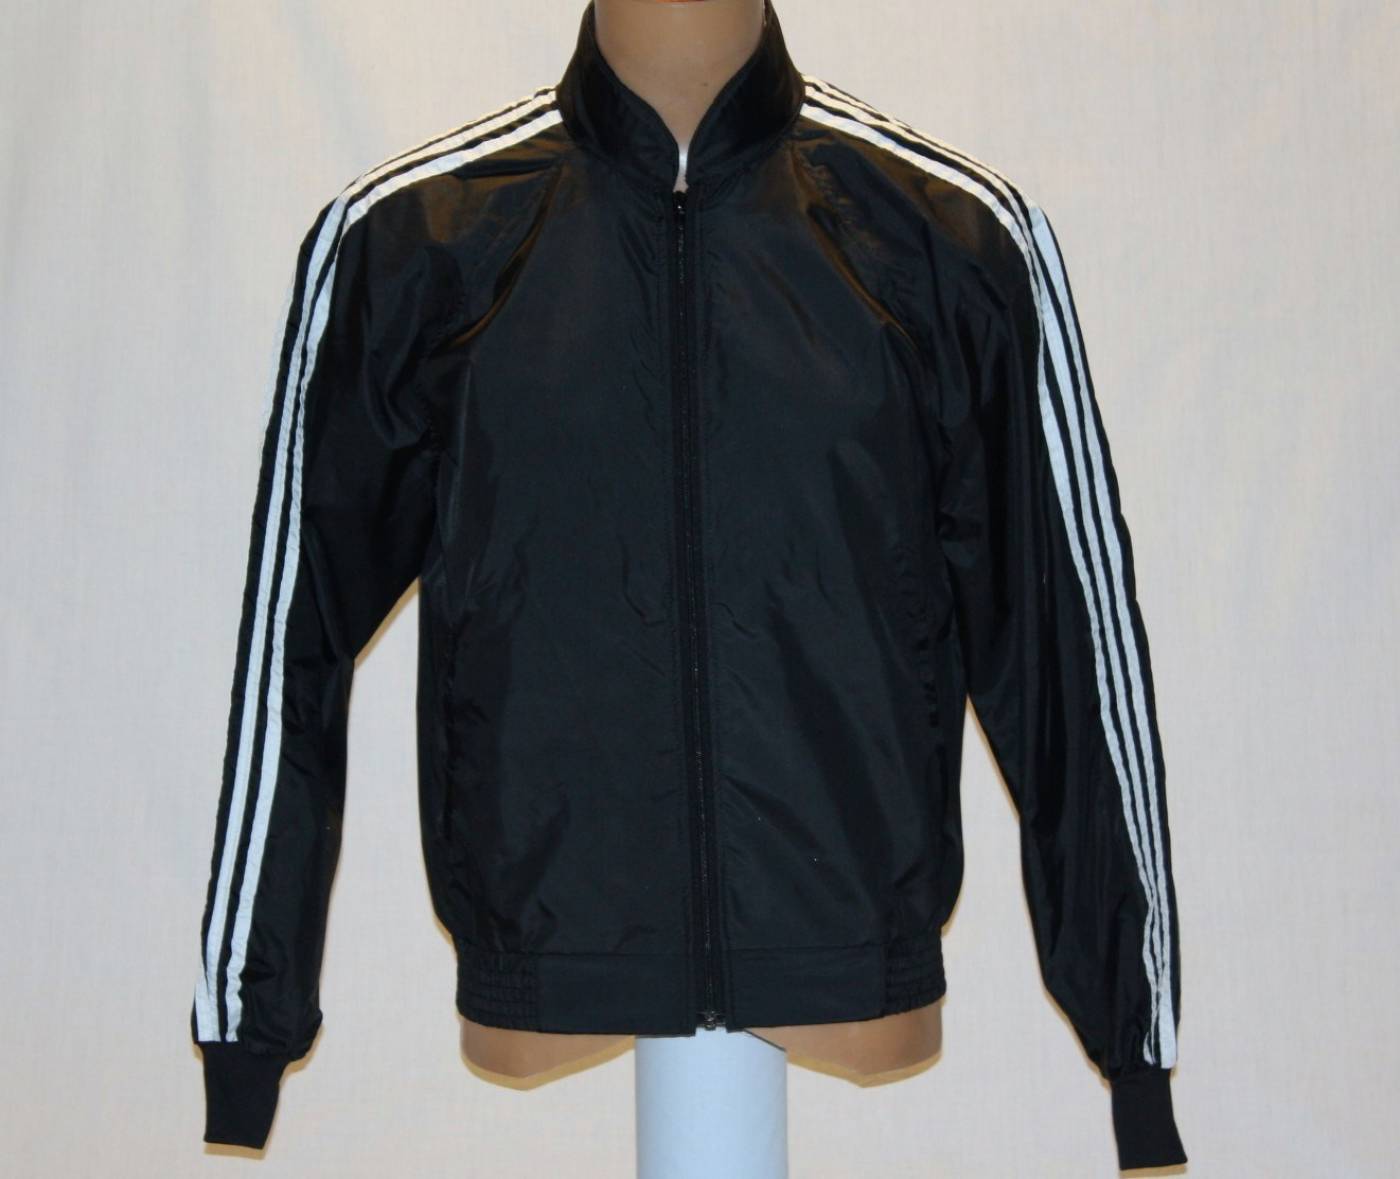 Tracksuit jacket from the Games of the XXV Olympiad, Barcelona 1992 ...